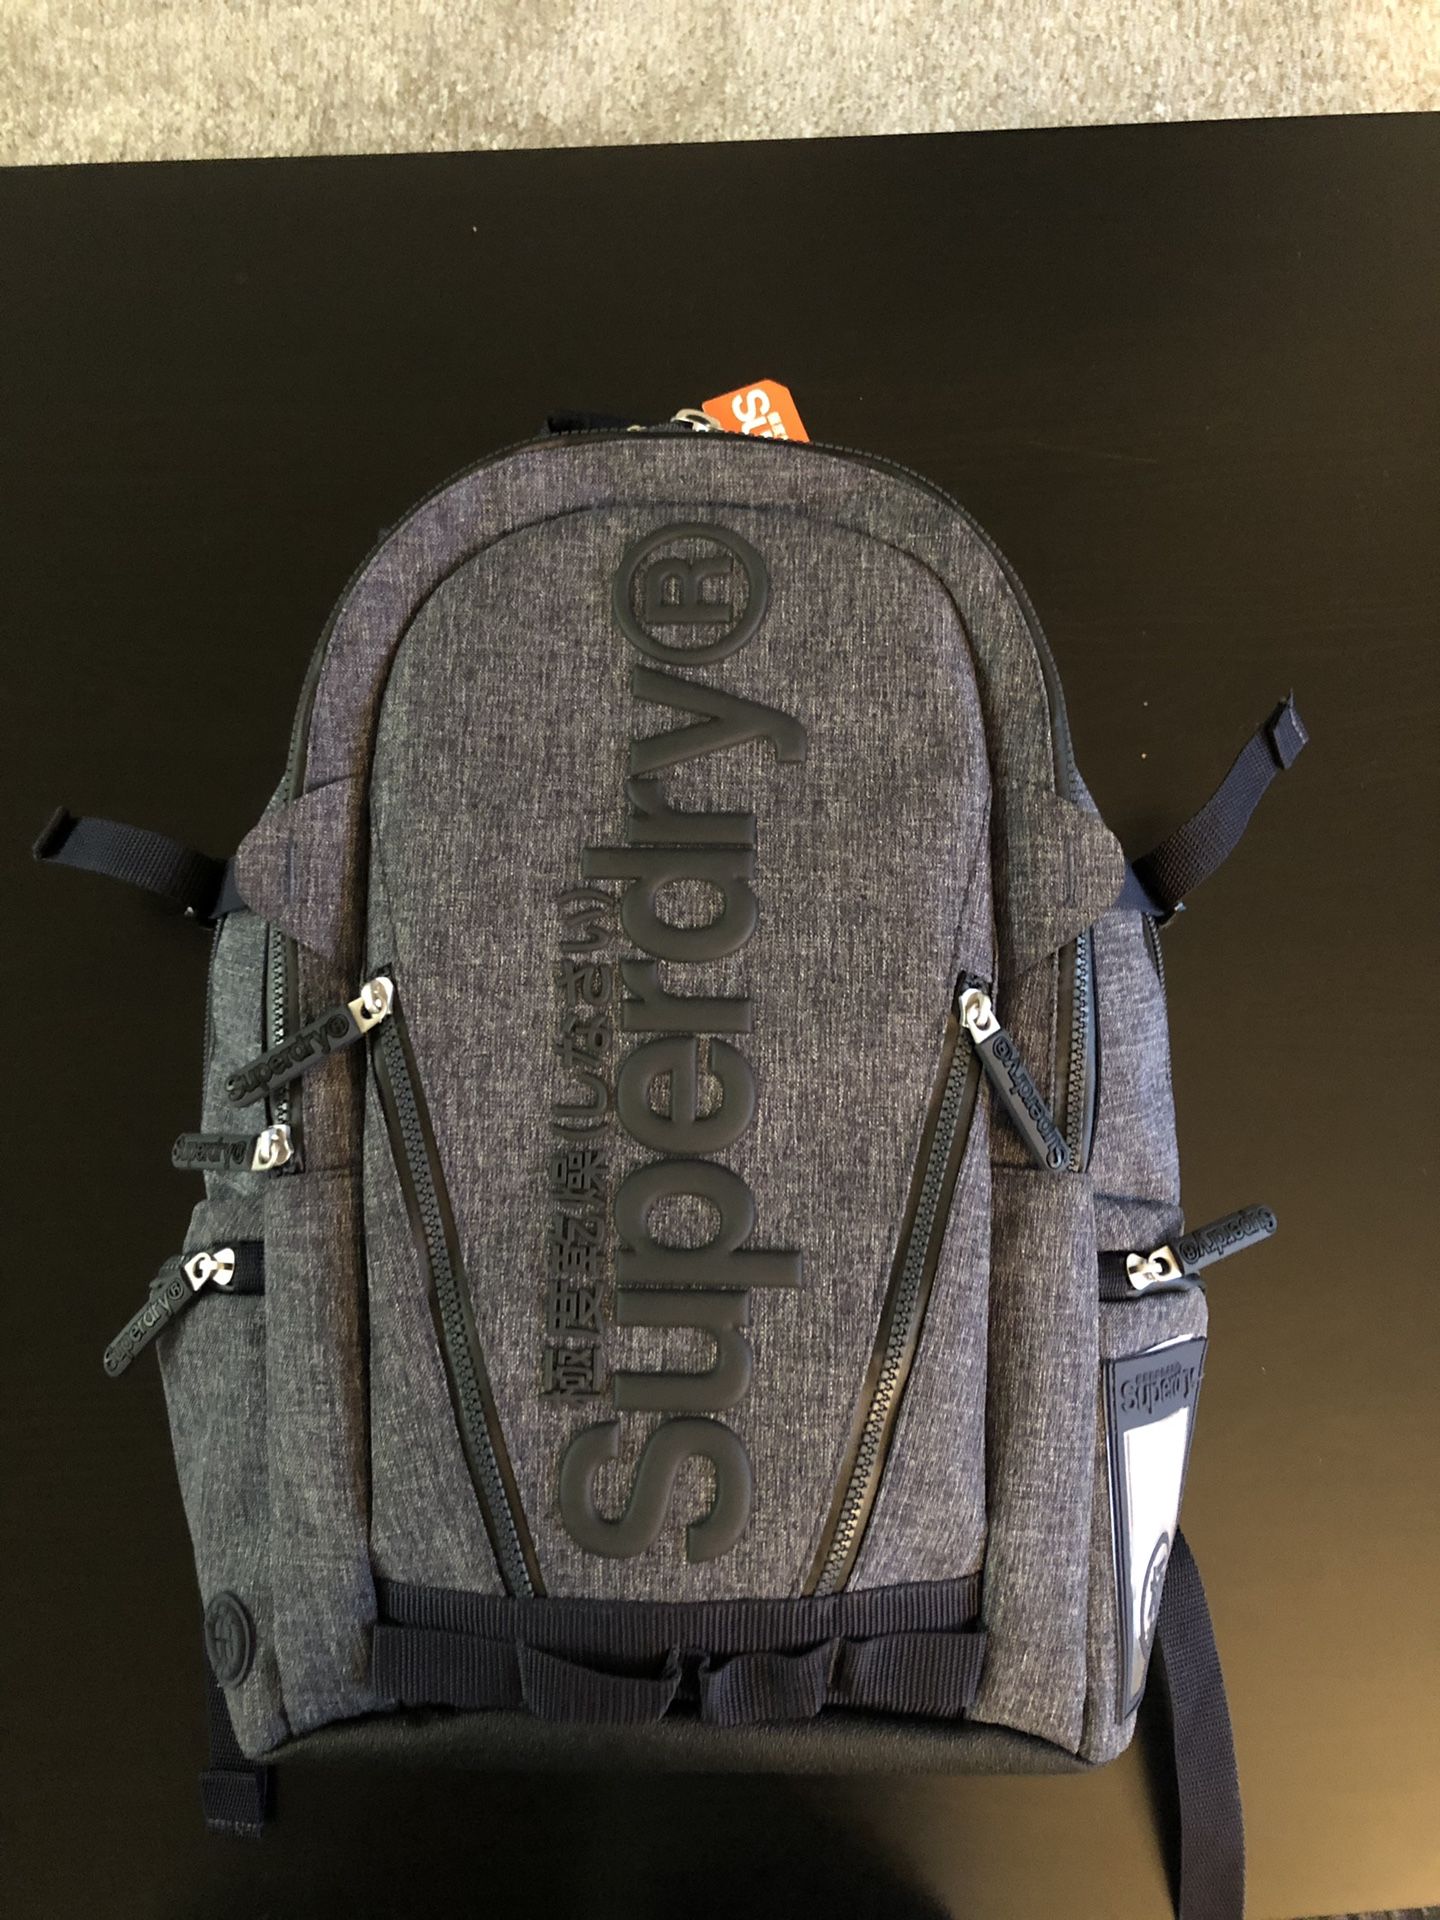 Superdry Backpack - Brand New, Never Used